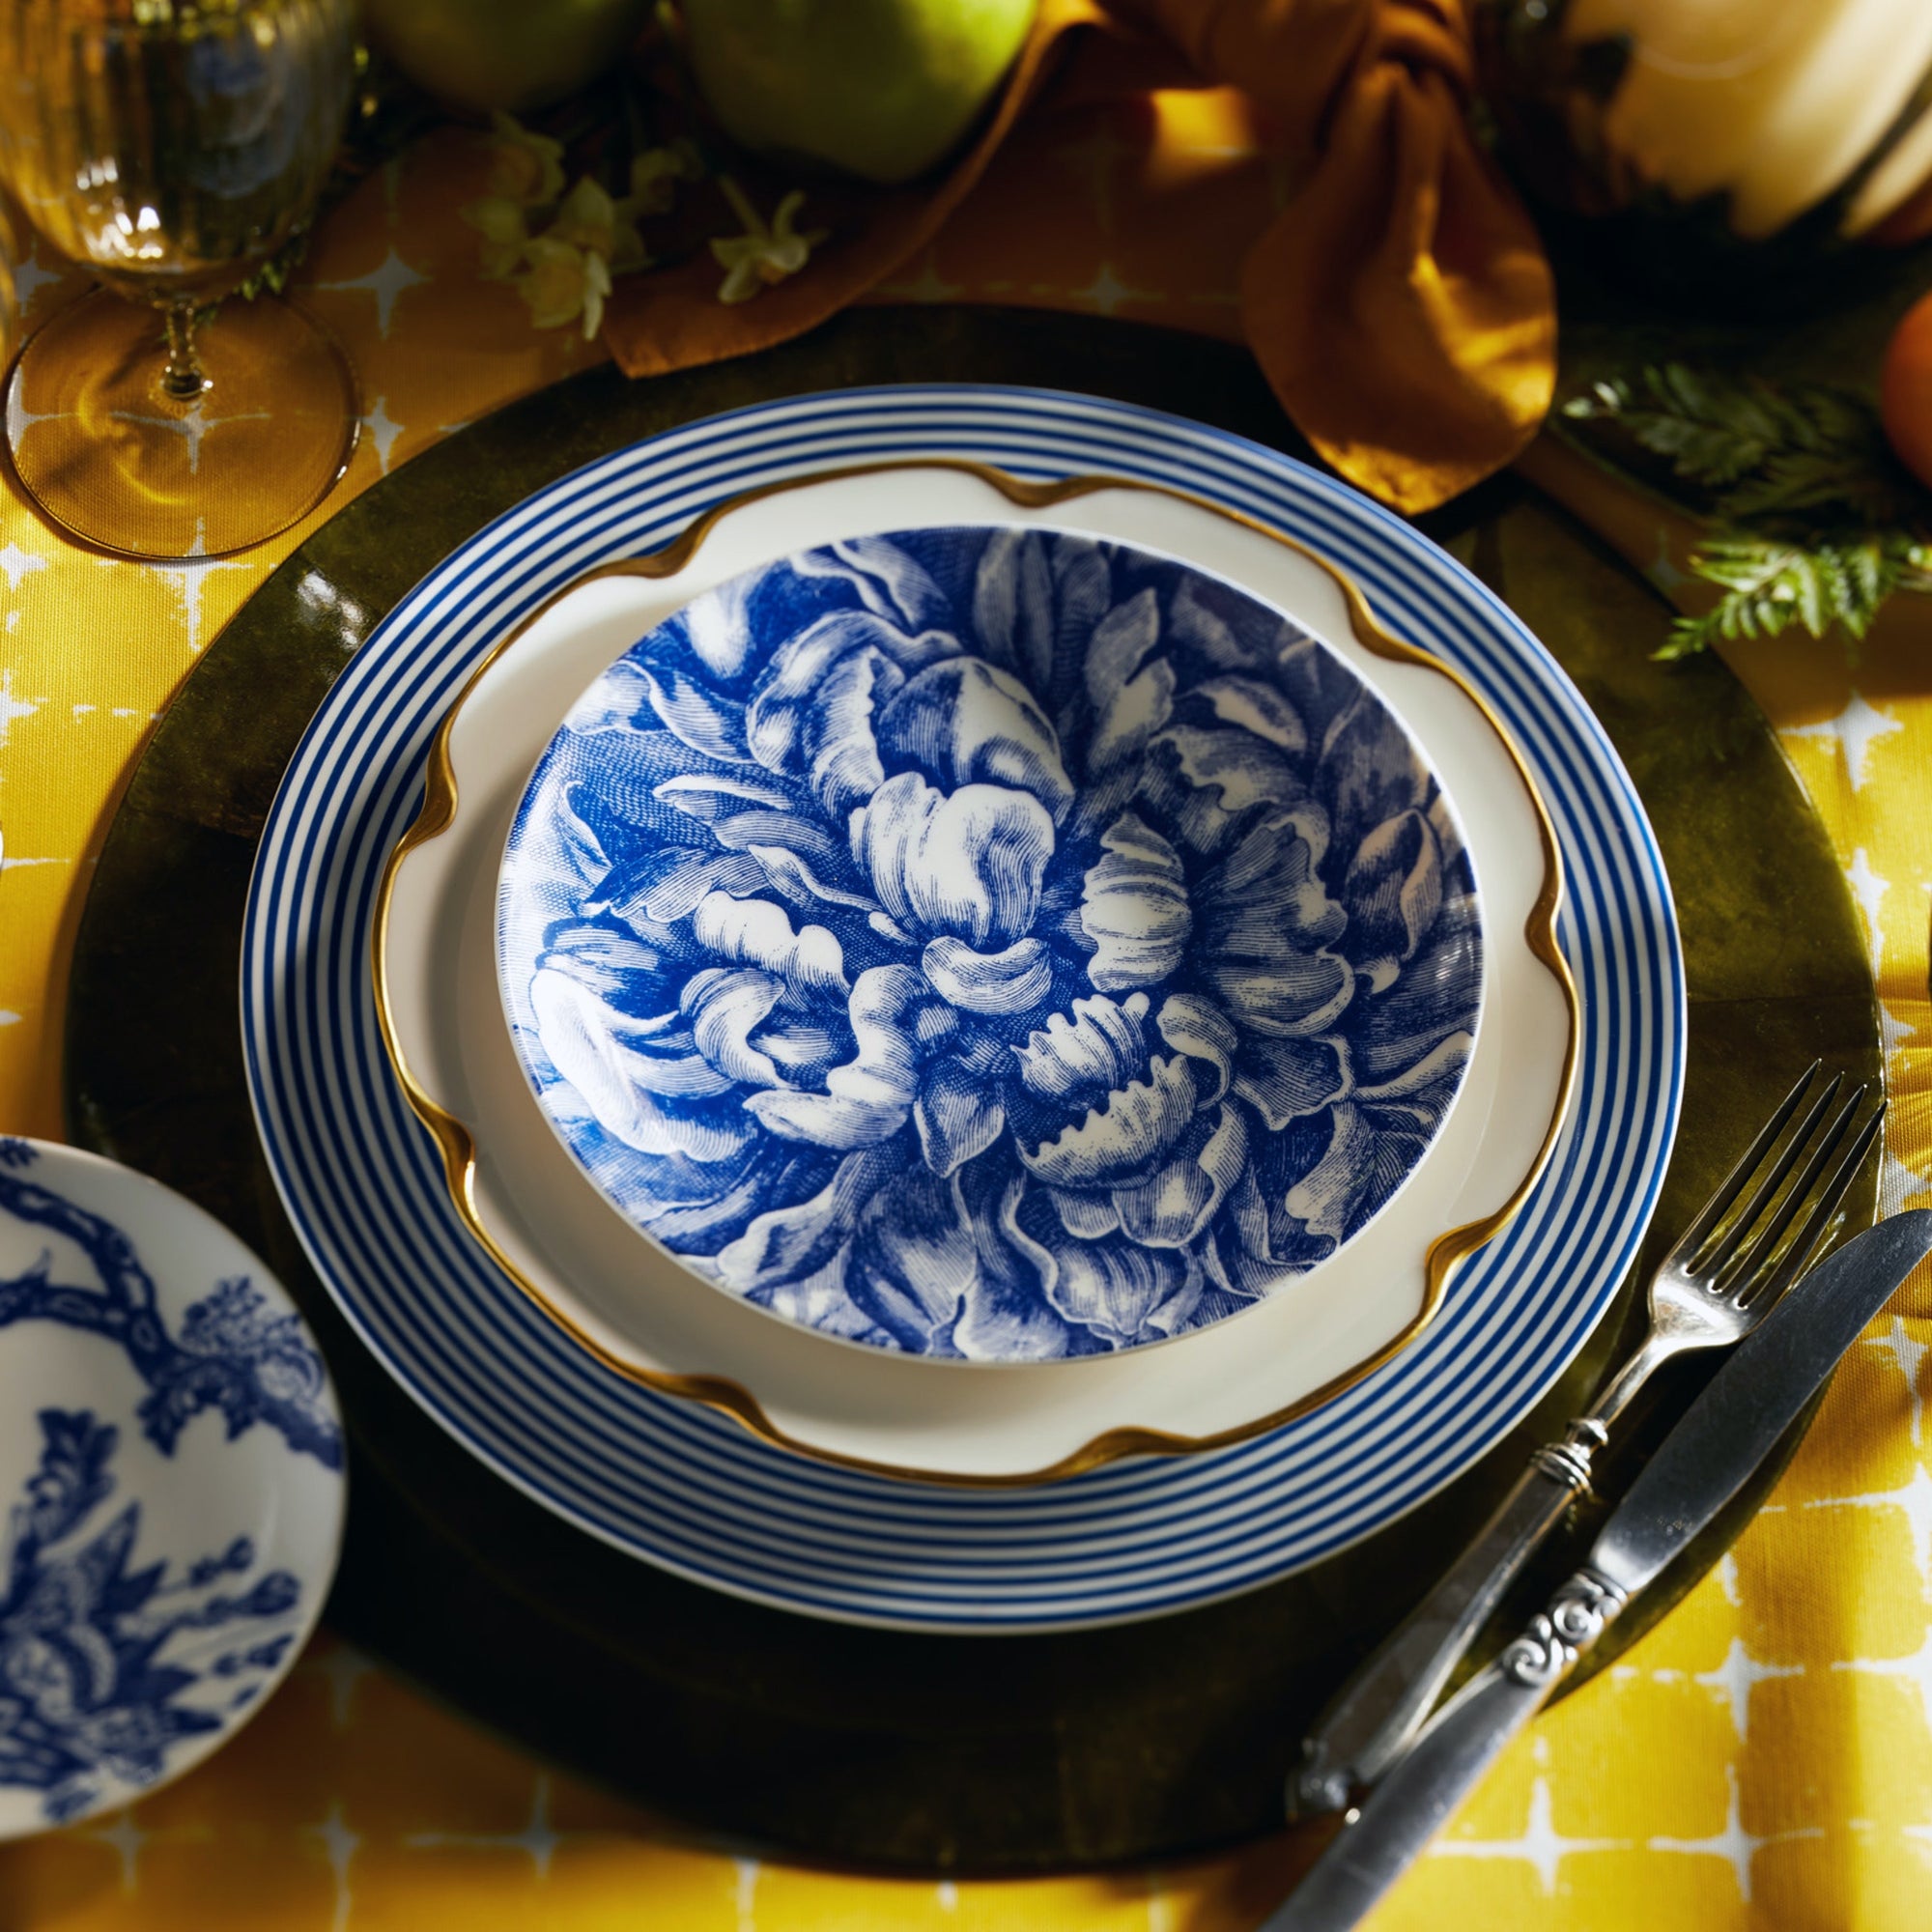 Four premium Peony Small Plates by Caskata Artisanal Home with blue floral patterns are arranged in an overlapping layout, showcasing the elegance of blue and white dinnerware.